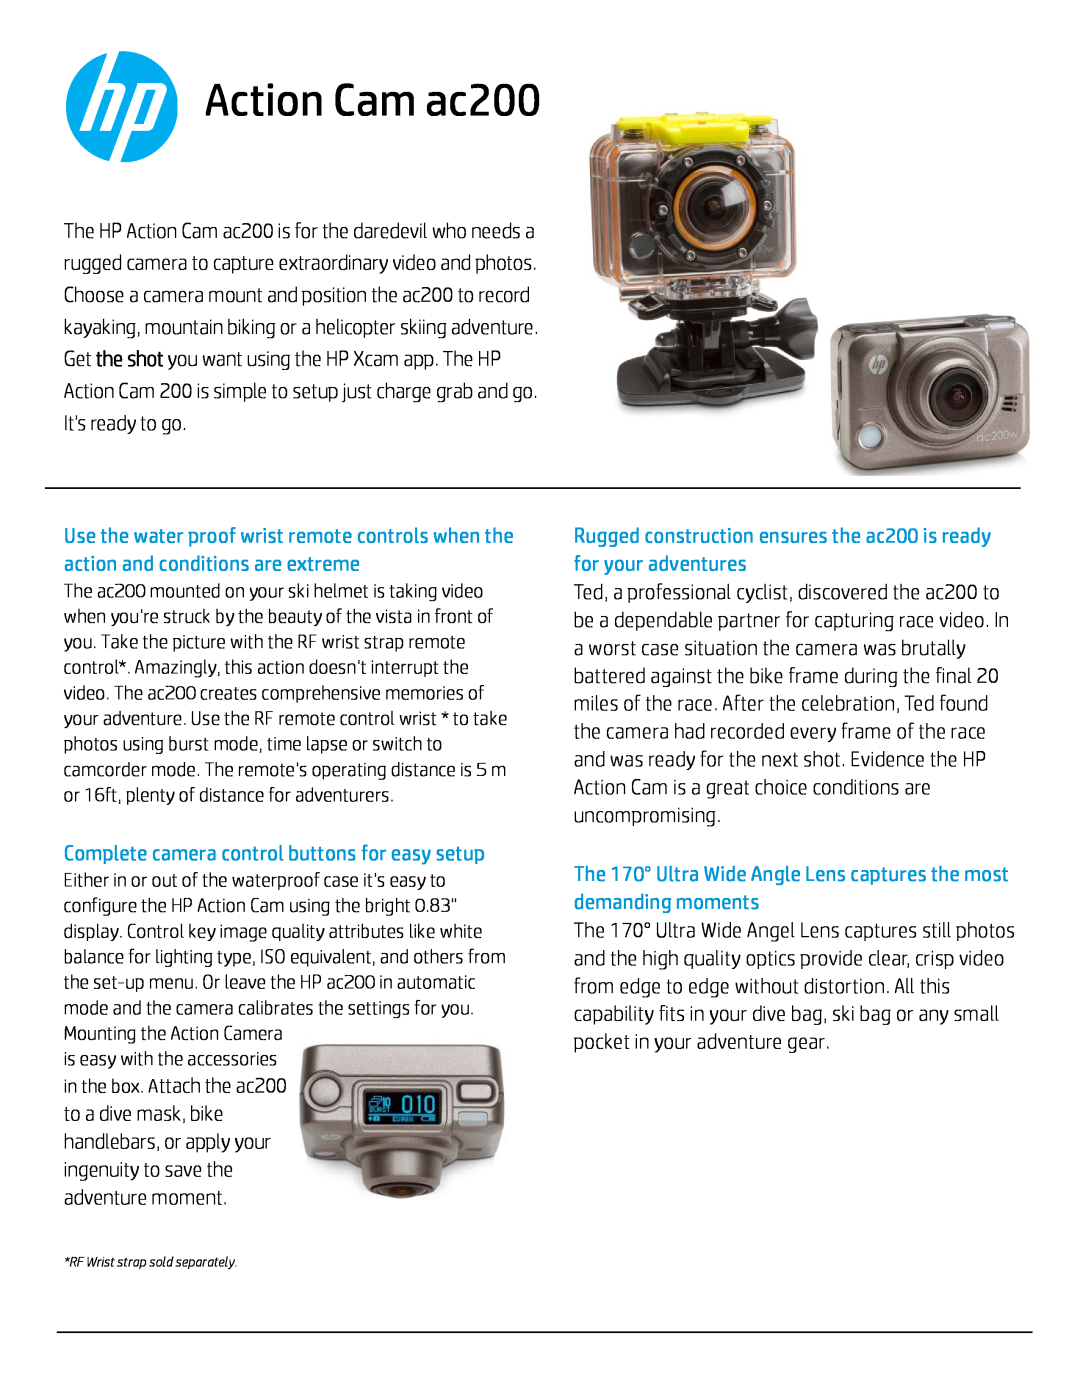 HP ac200 Action Camera manual Action Cam ac200, Complete camera control buttons for easy setup 